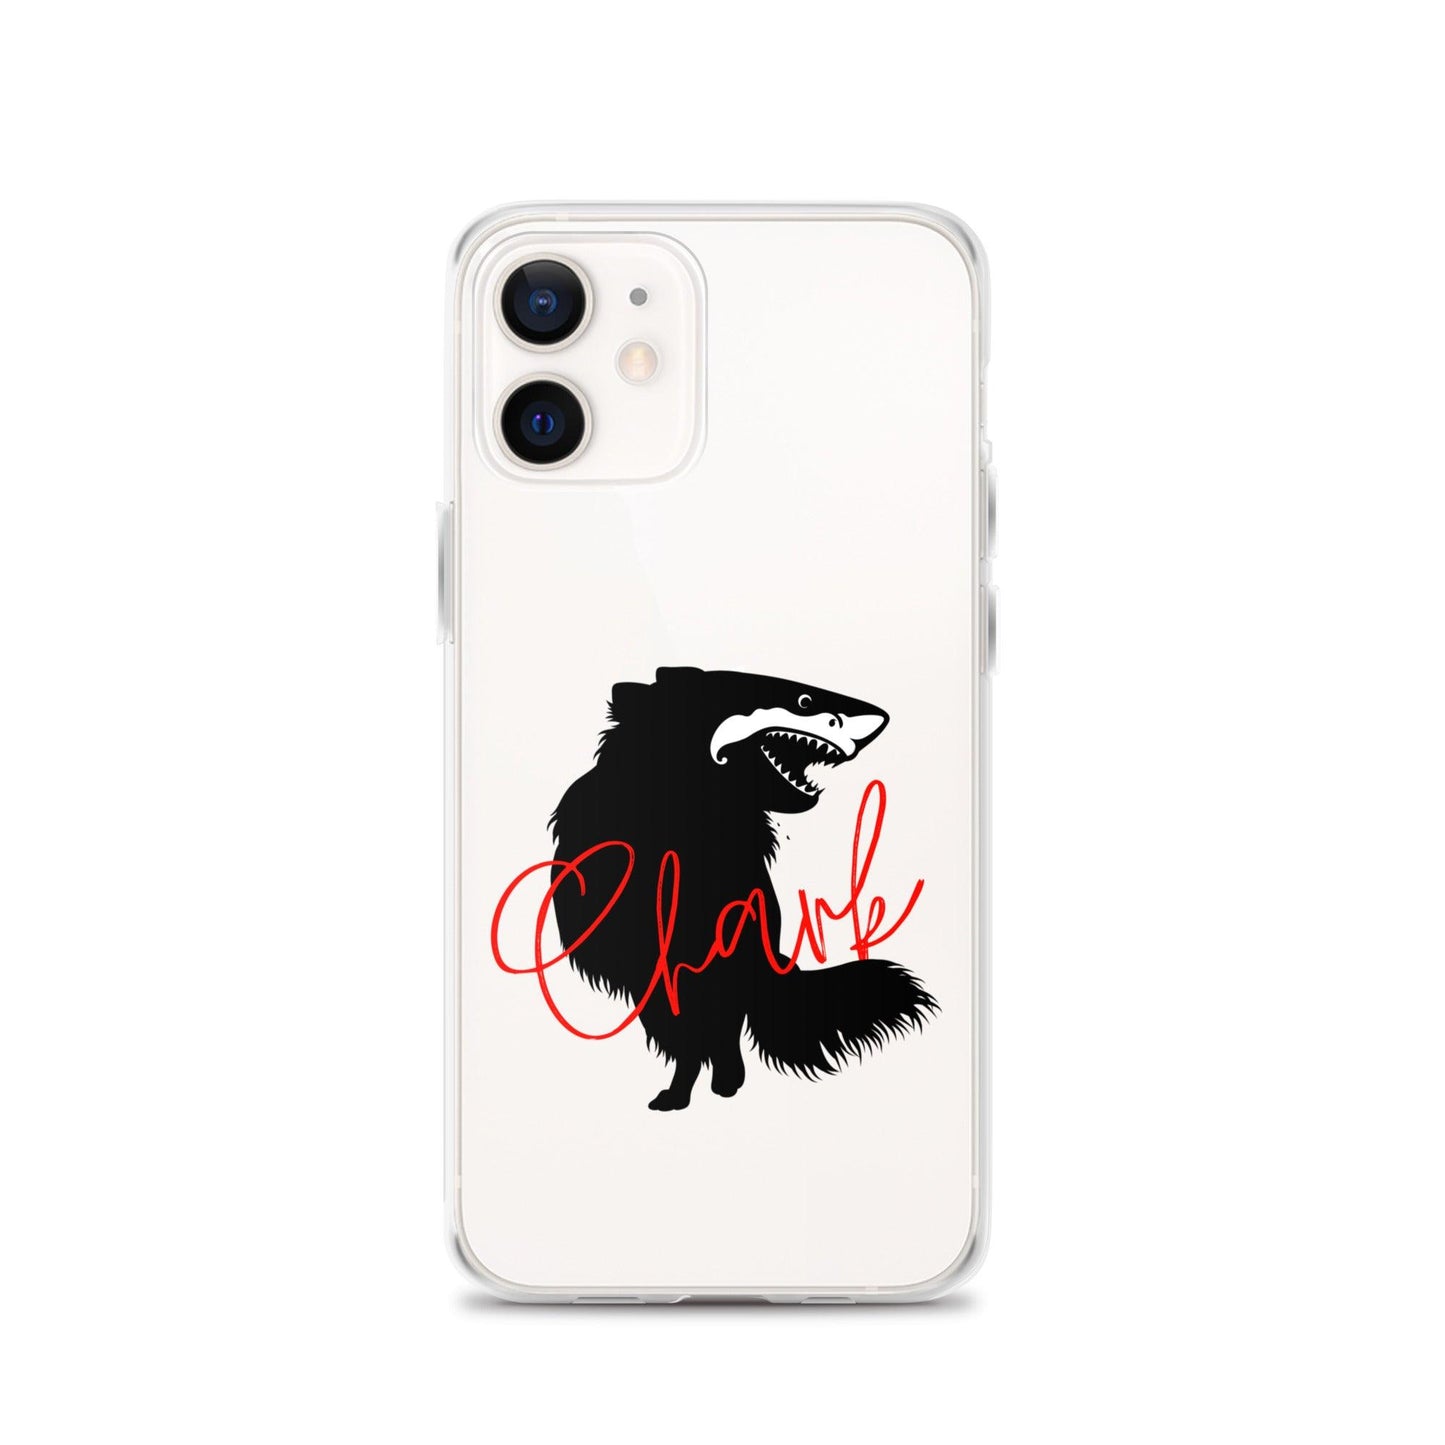 Chihuahua + Shark = Chark Clear iPhone case with the black silhouette of a longhaired chihuahua with the face of a great white shark - mouth open to show off jaws lined with lots of sharp white teeth. The word "Chark" is artfully placed in red cursive font over the image. For trendy chi lovers. iPhone 12 case.